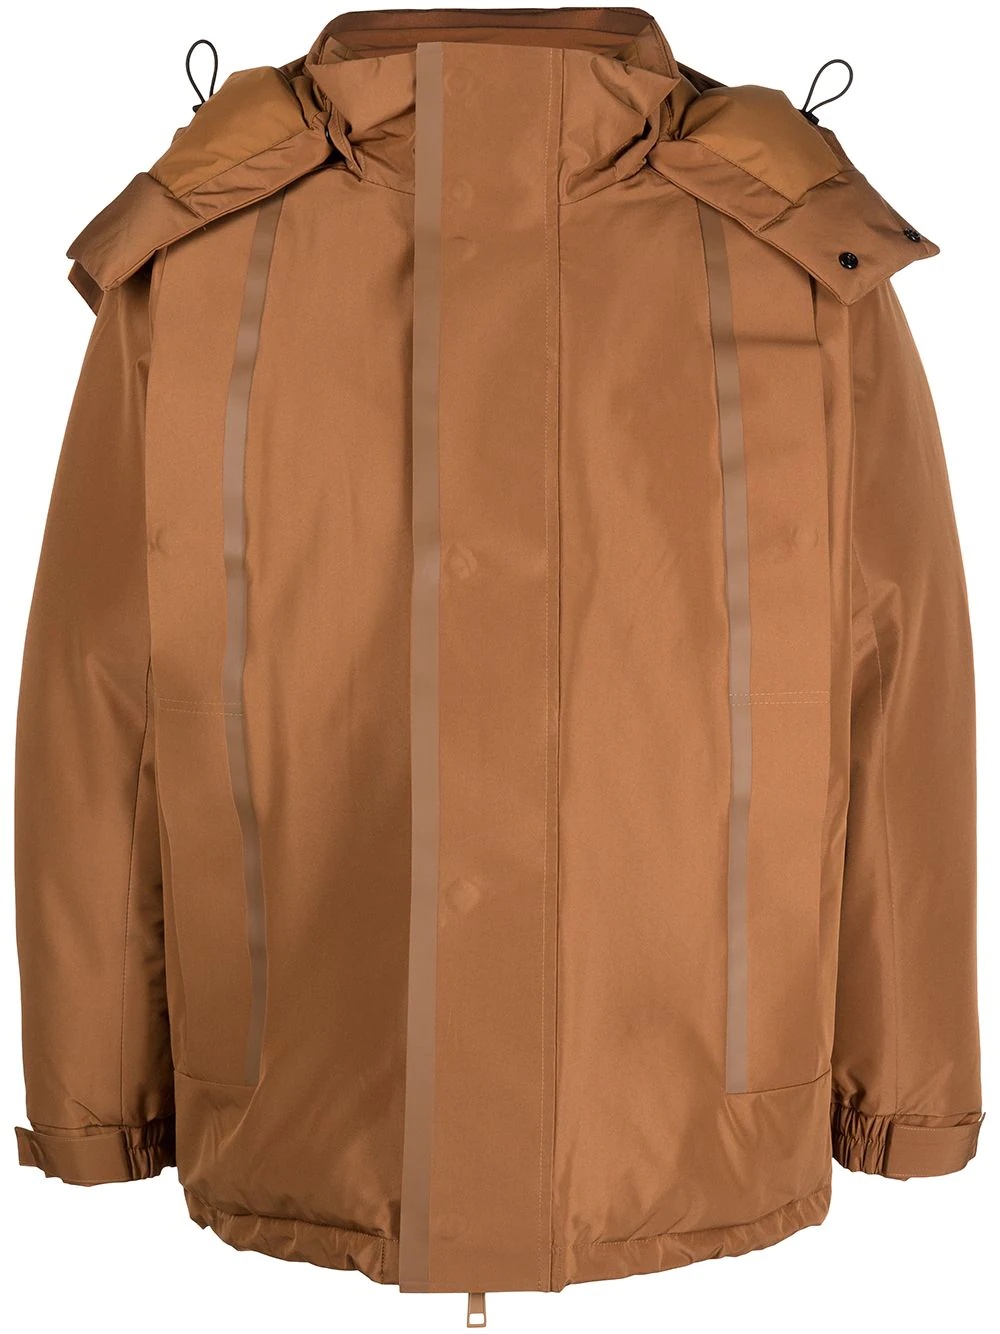 The Journey puffer jacket - 1